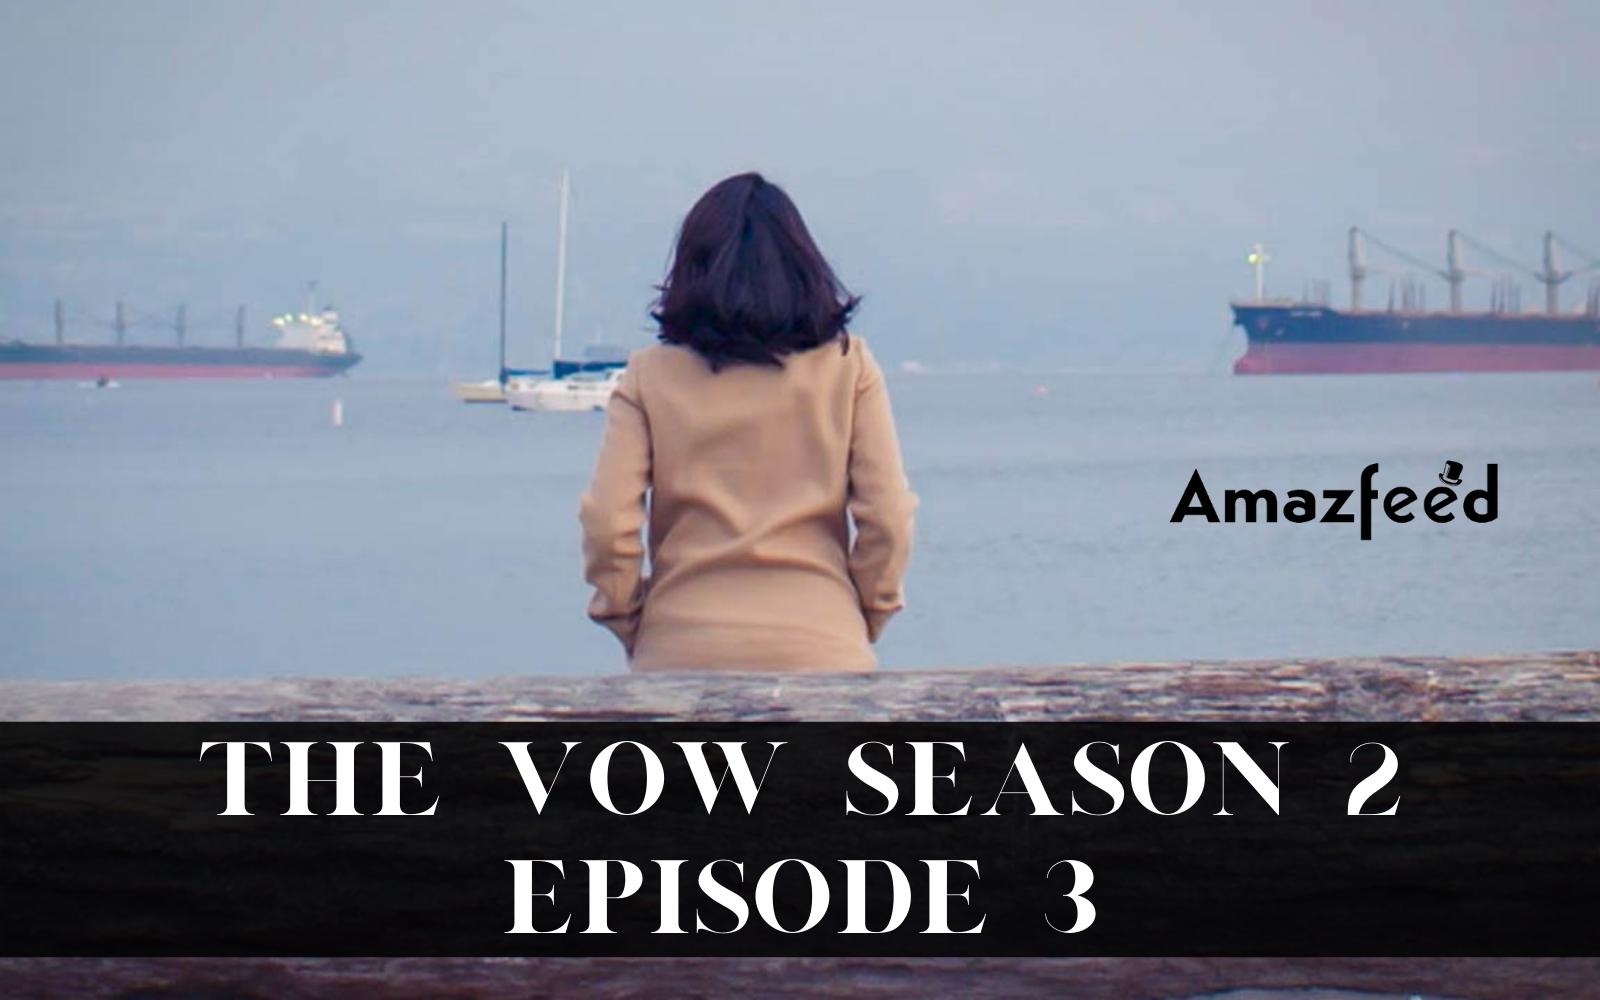 The Vow Season 2 Episode 3 : Release Date, Premiere Time, Promo, Review, Countdown, Spoiler, & Where to Watch